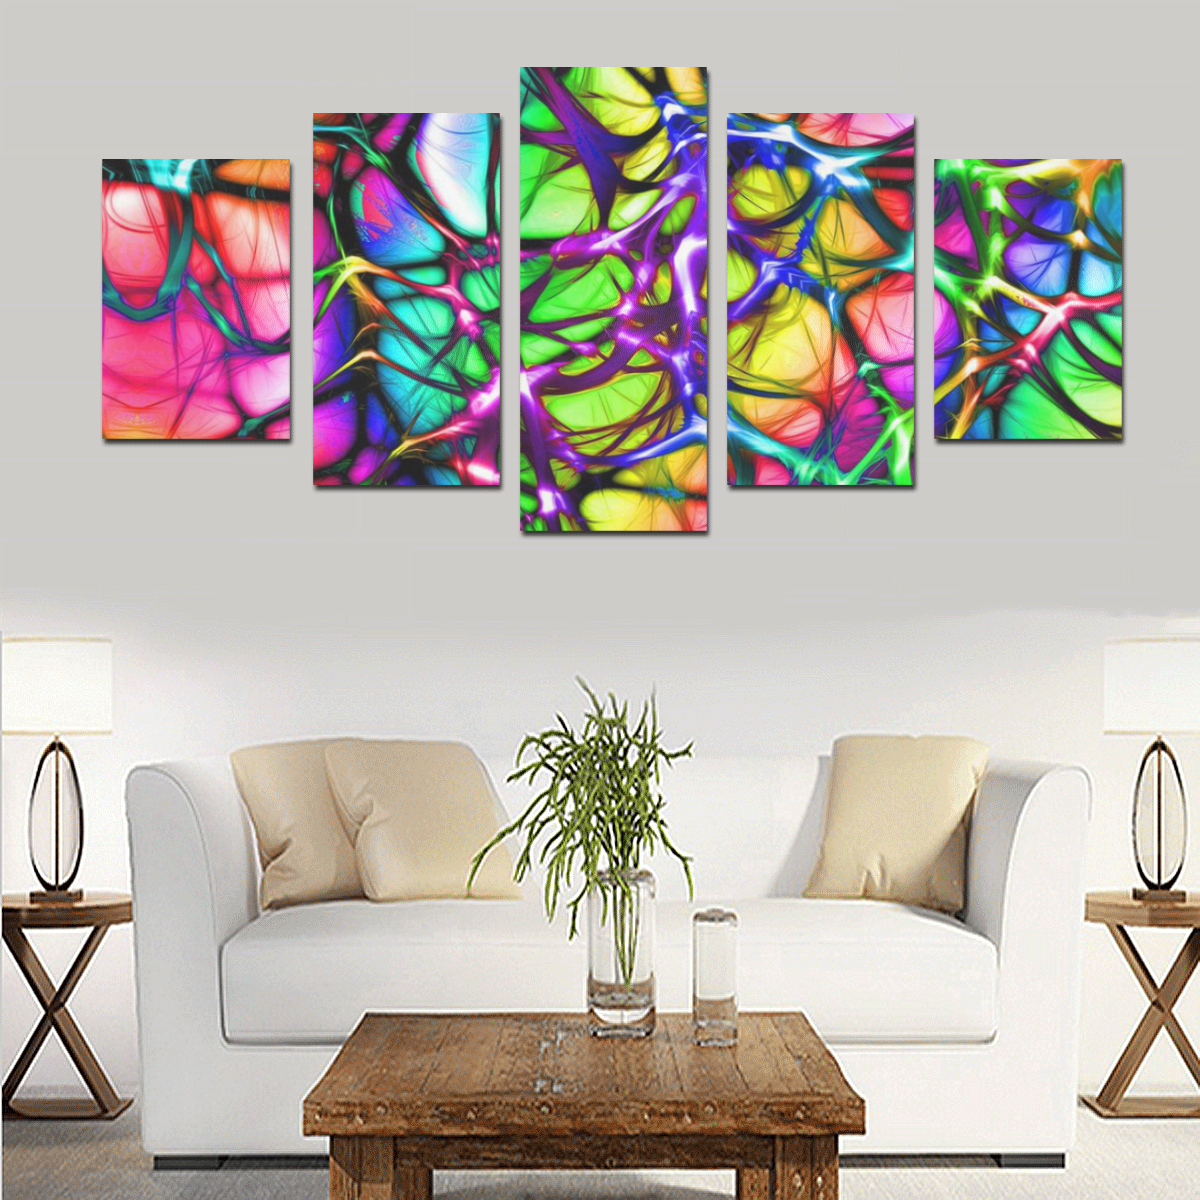 alive 5 (abstract) by JamColors Canvas Print Sets D (No Frame)